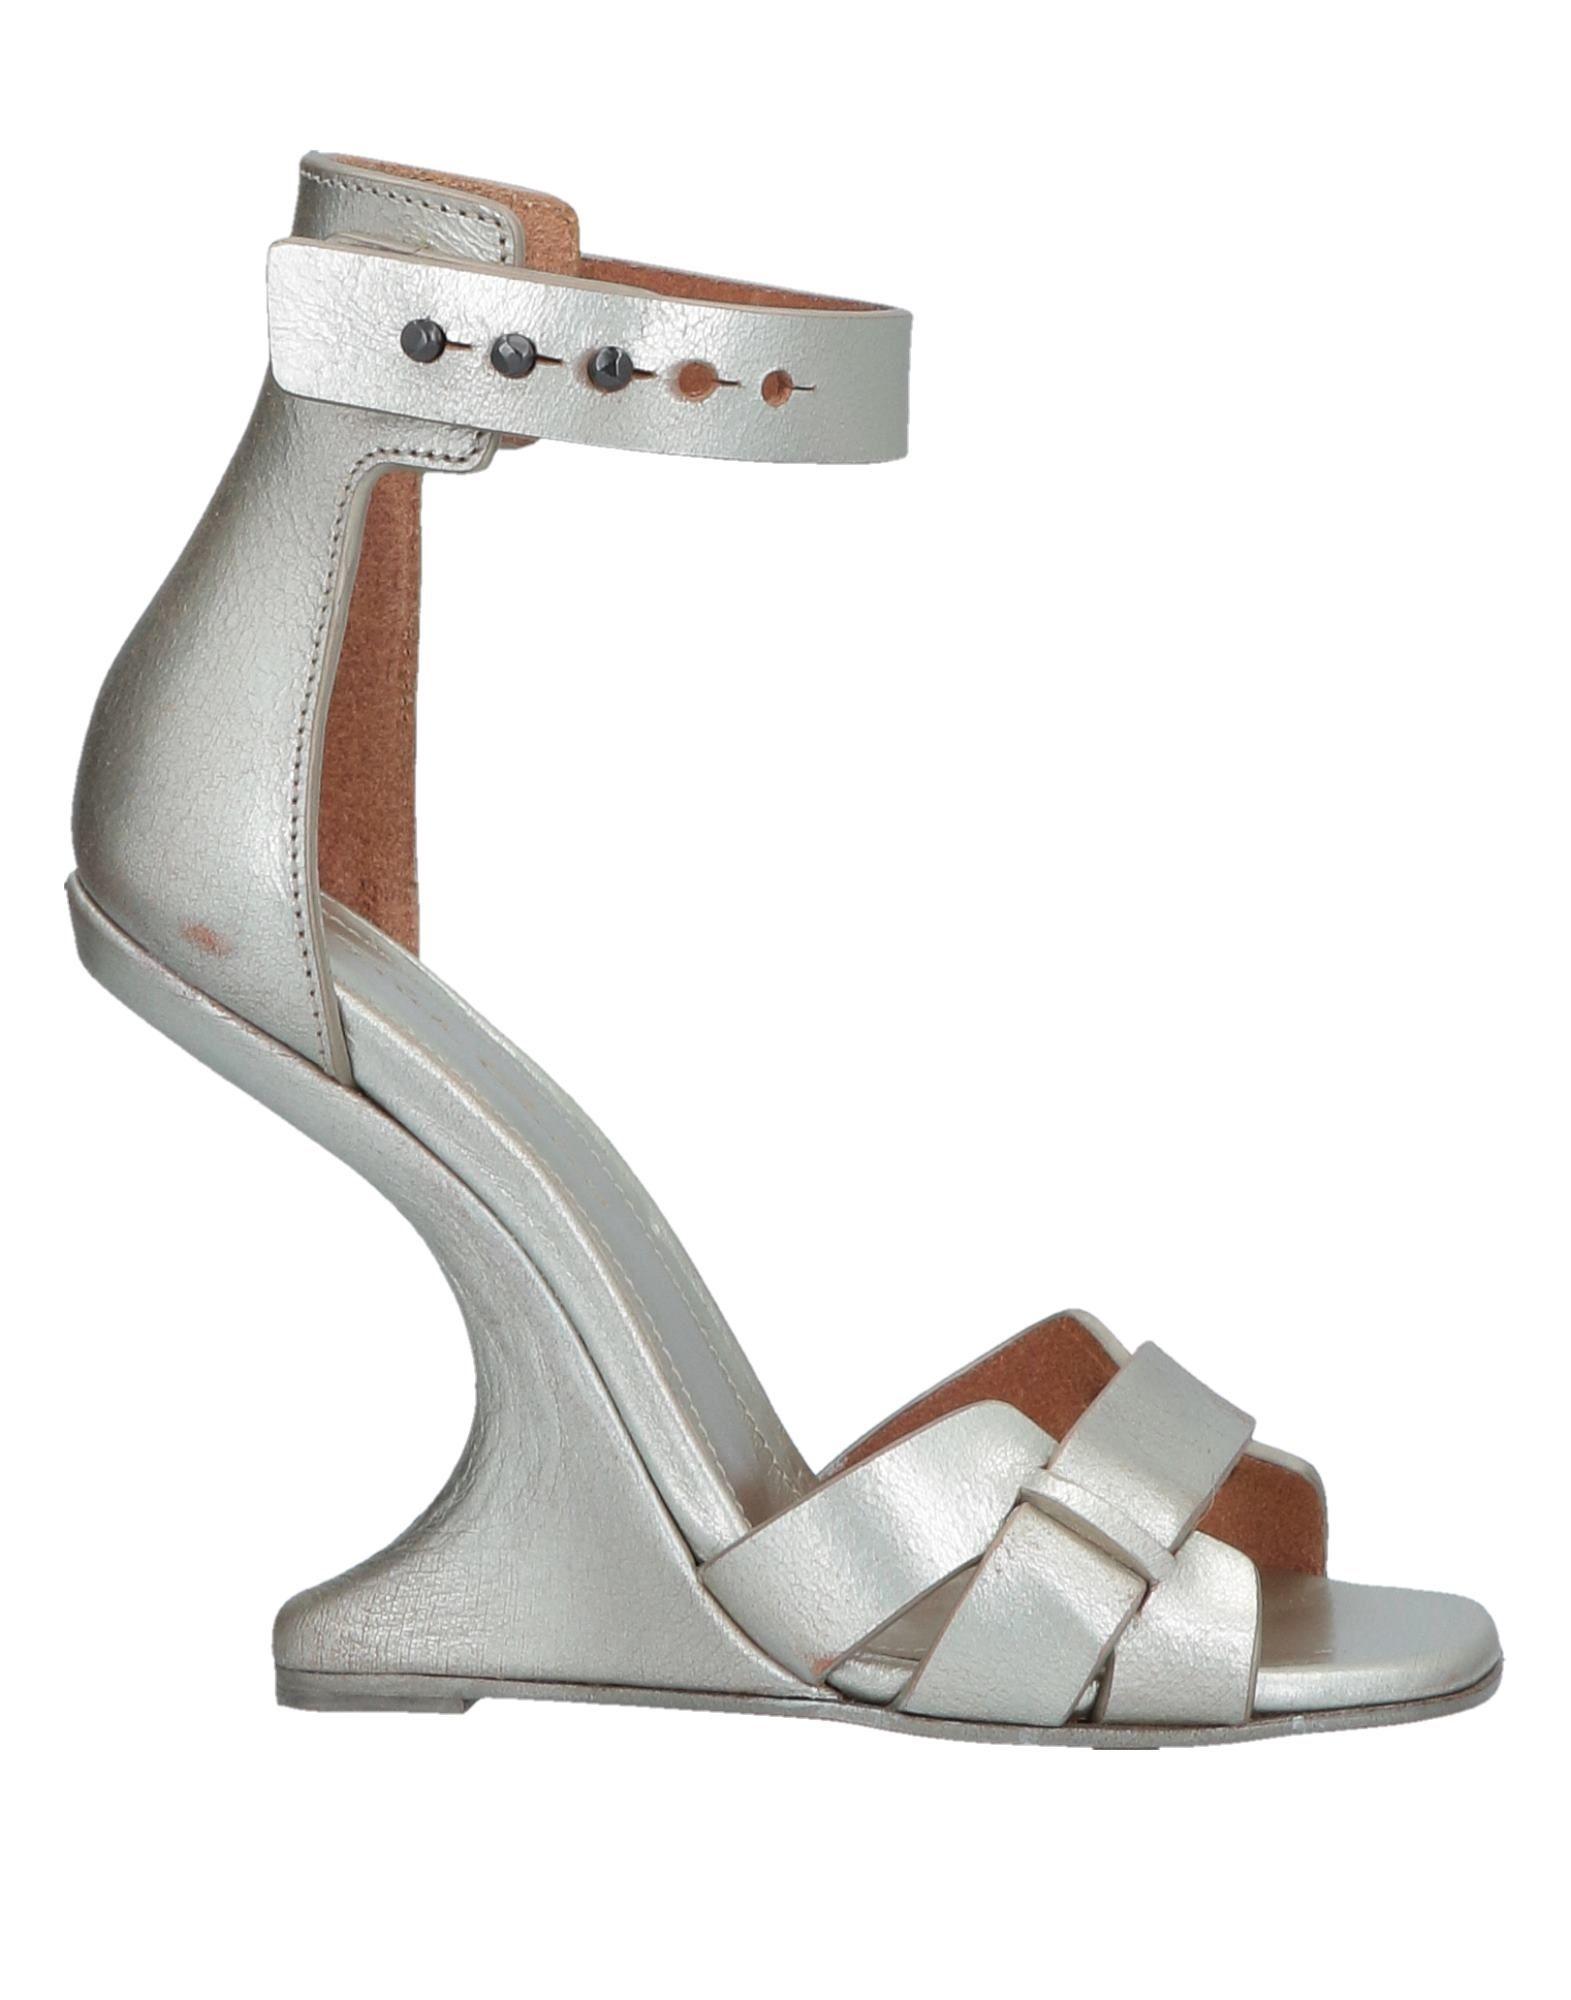 Rick Owens Leather Sandals in Silver (Metallic) - Lyst